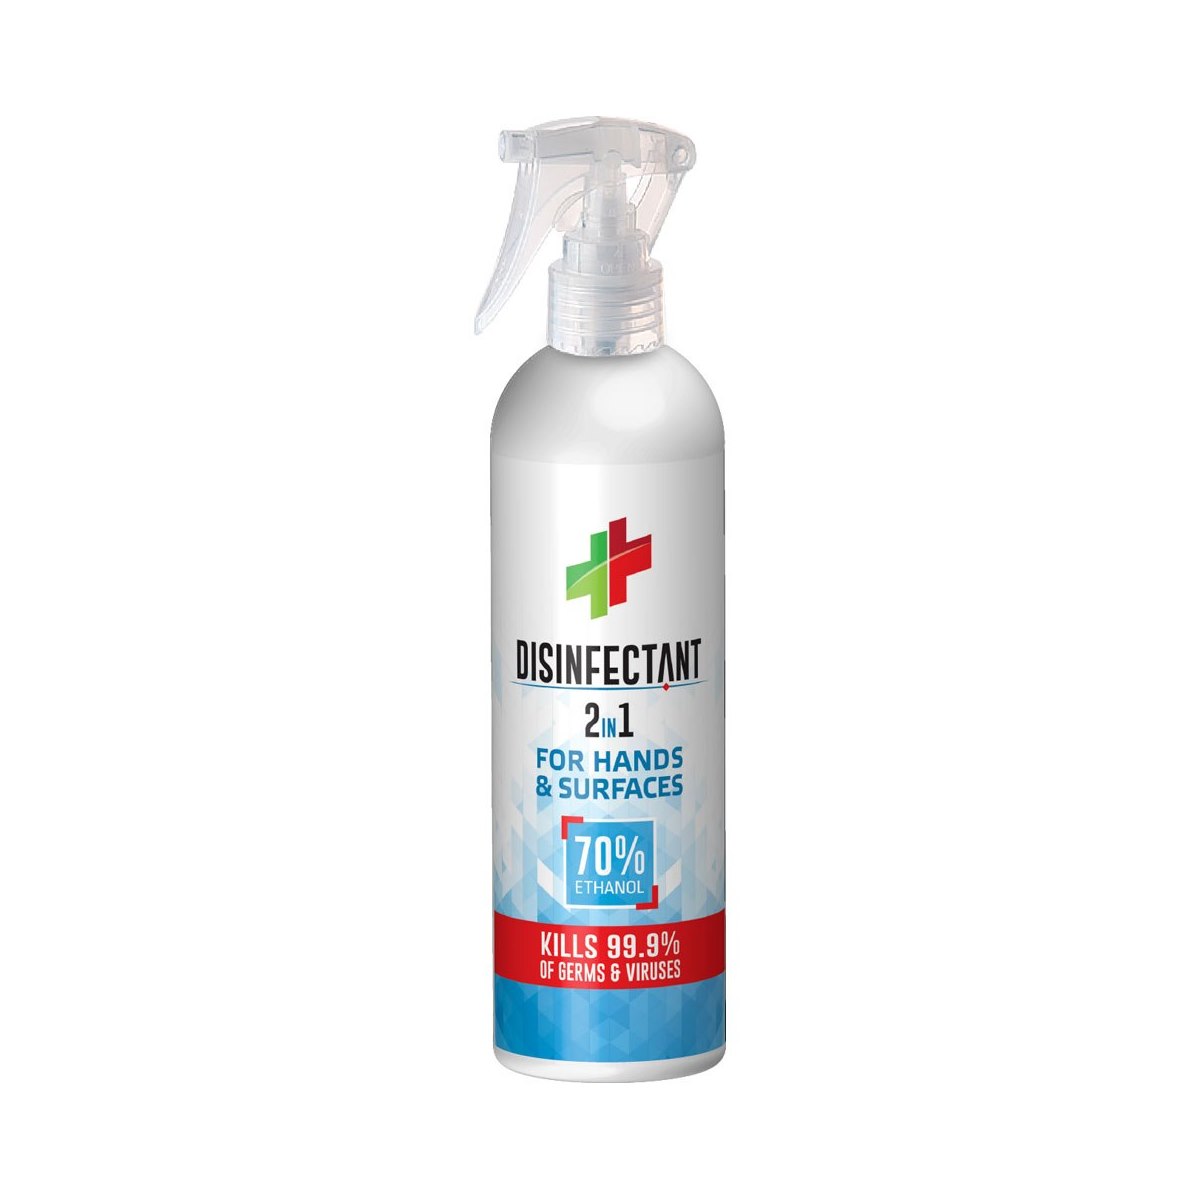 Tri-Bio 2 in 1 Disinfectant for Hands and Hard Surfaces Travel Spray 100ml